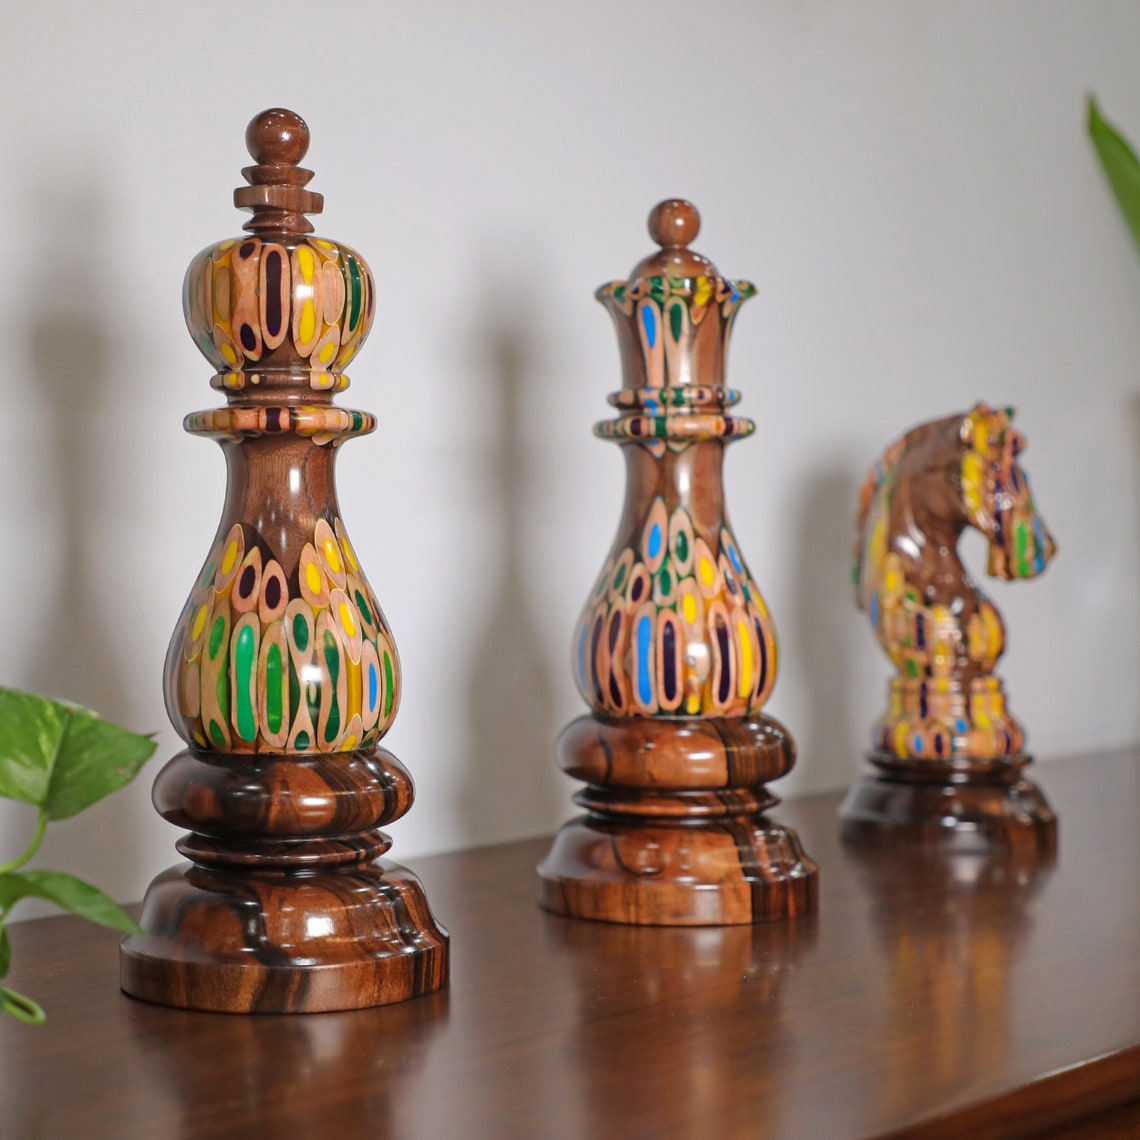 Large Ornamental Chess Pieces for decoration